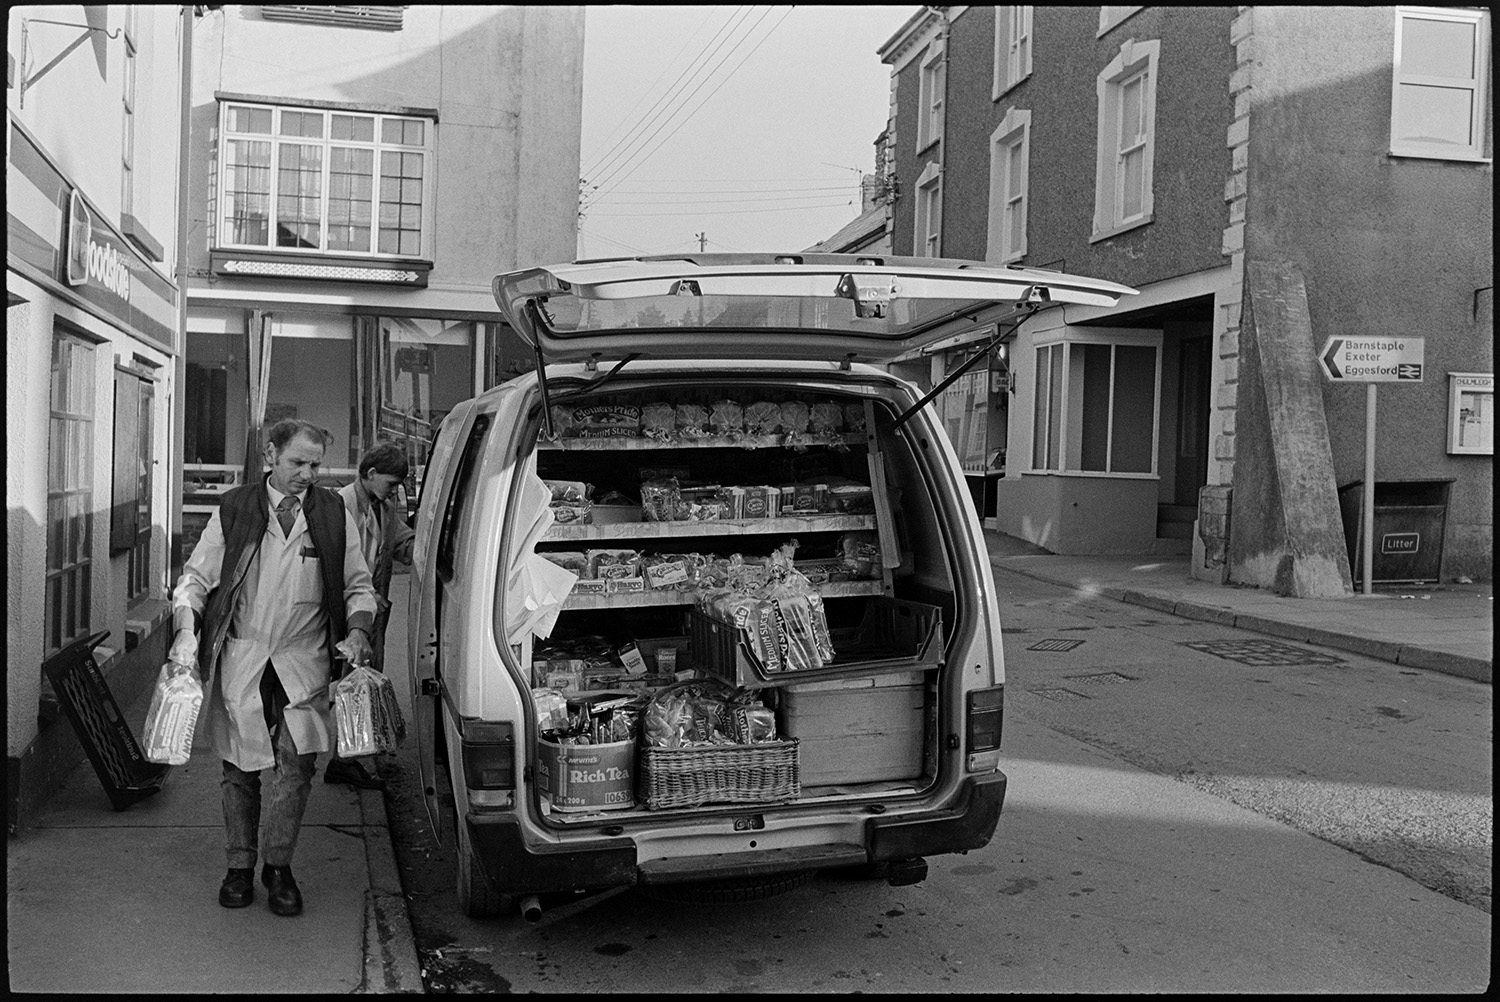 Baker making deliveries from van in morning.
[Street scene with a man unloading bread from the back of an open van in Chulmleigh. Loaves of bread can be seen stacked in the van.]